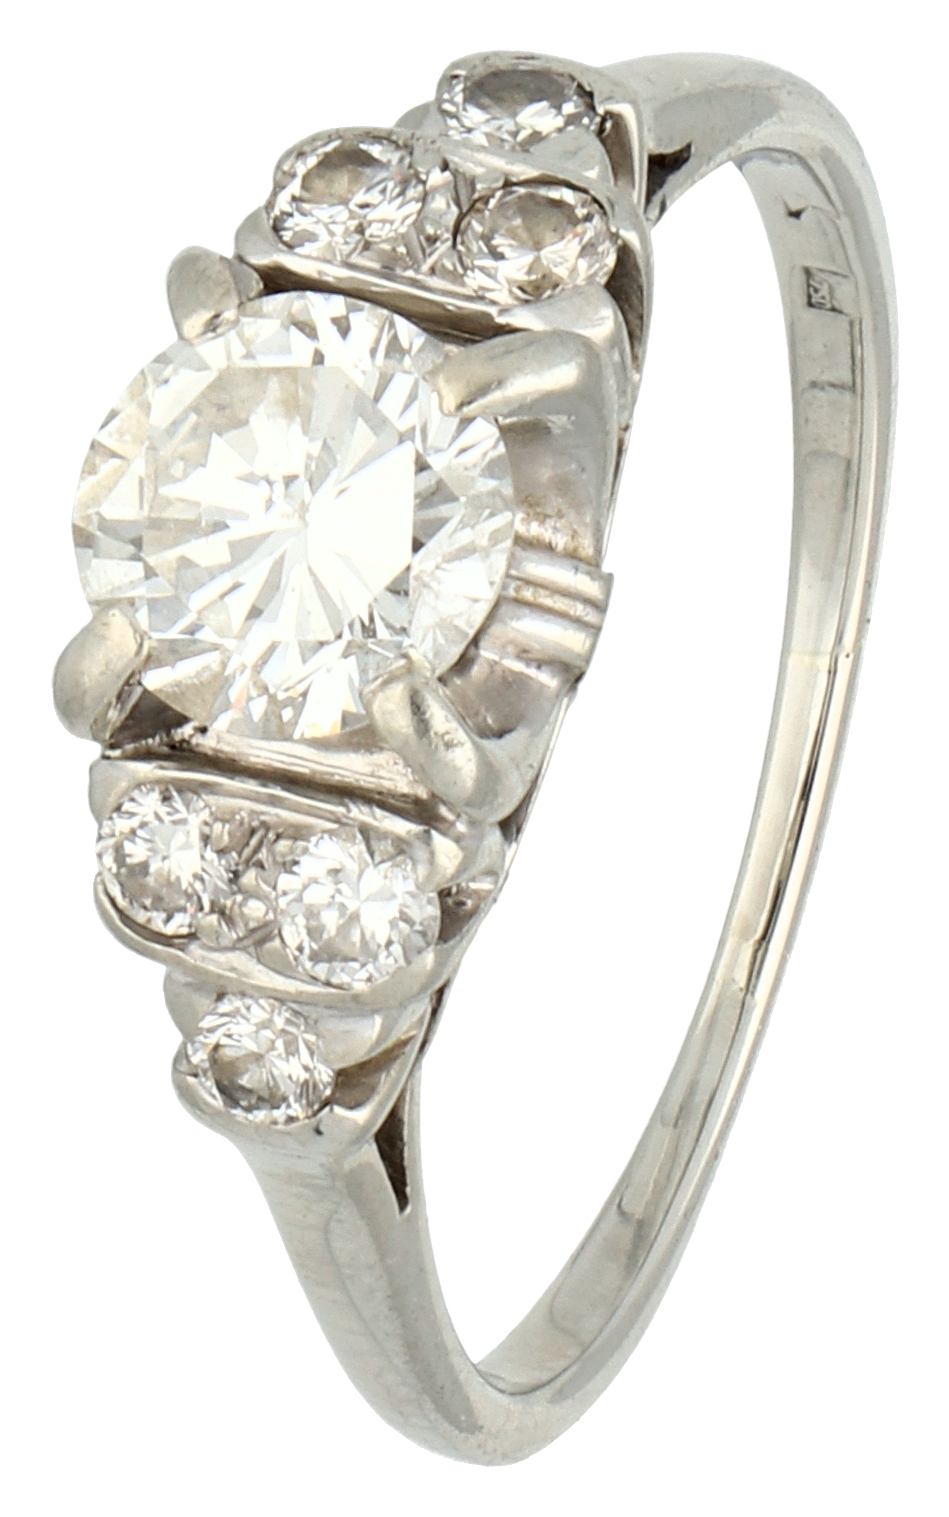 No Reserve - 18K White gold Art Deco ring set with approx. 1.02 ct. diamond.